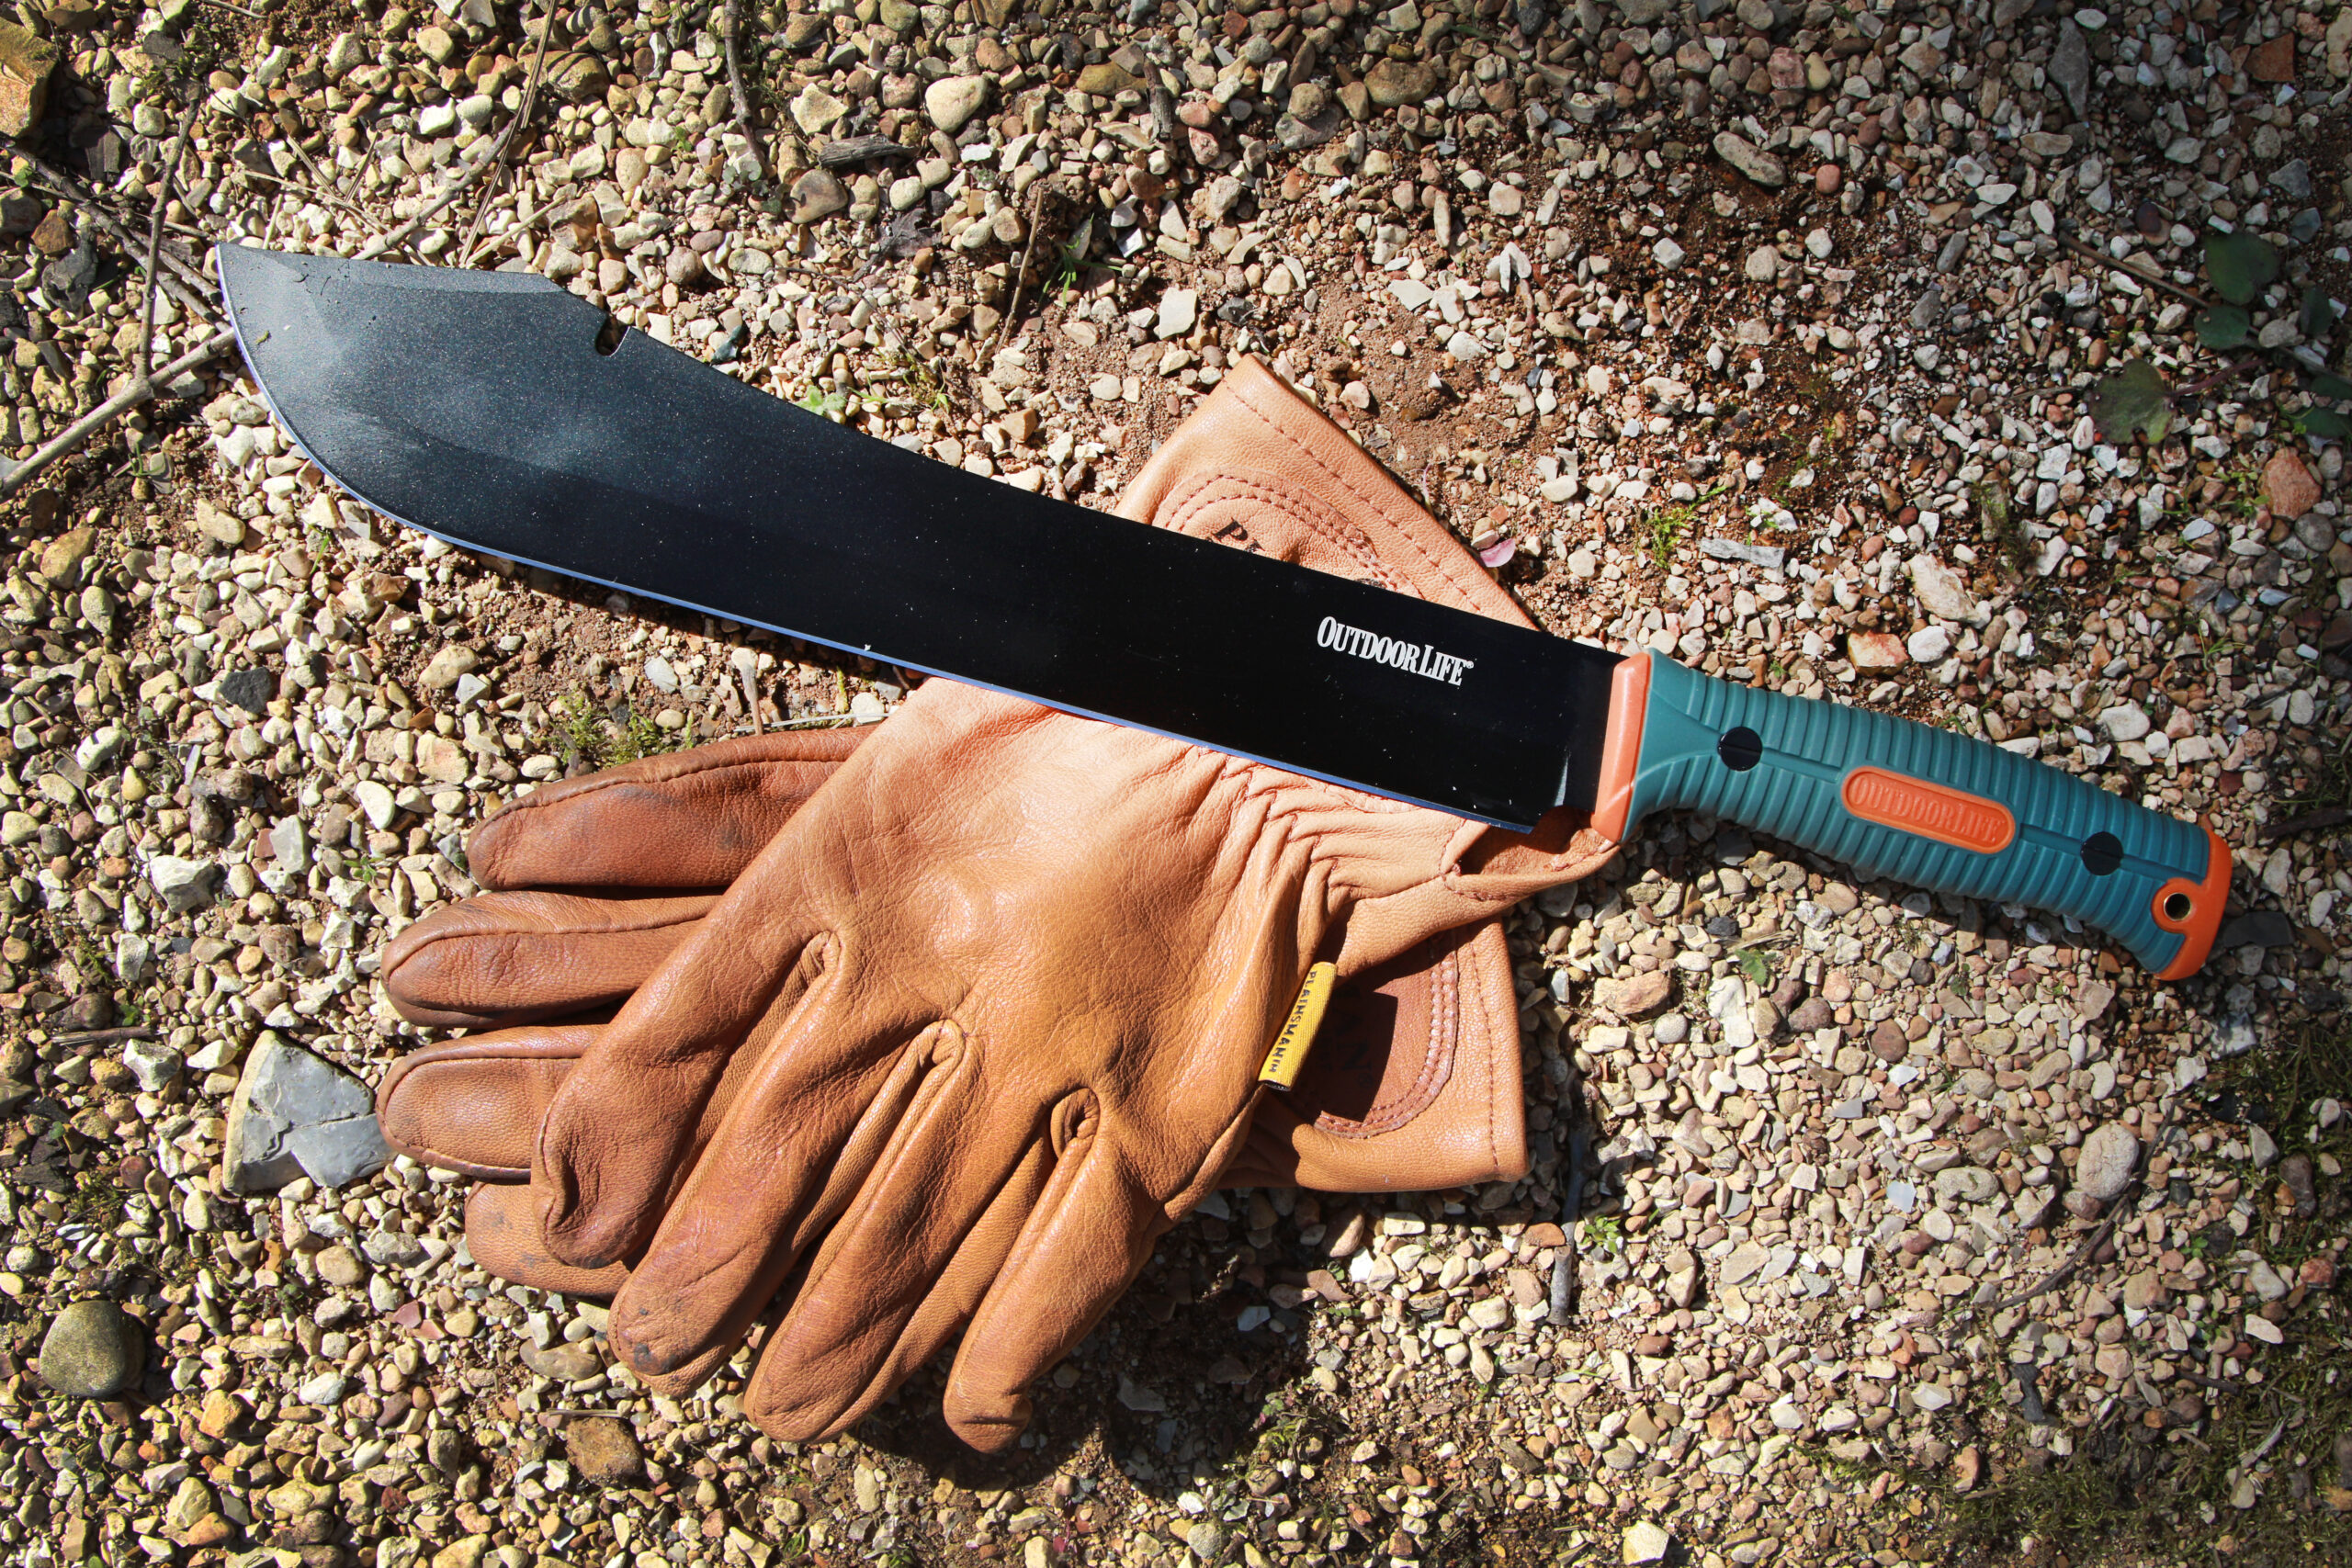 A black-blade camp machete beside a piar of gloves in the gravel.